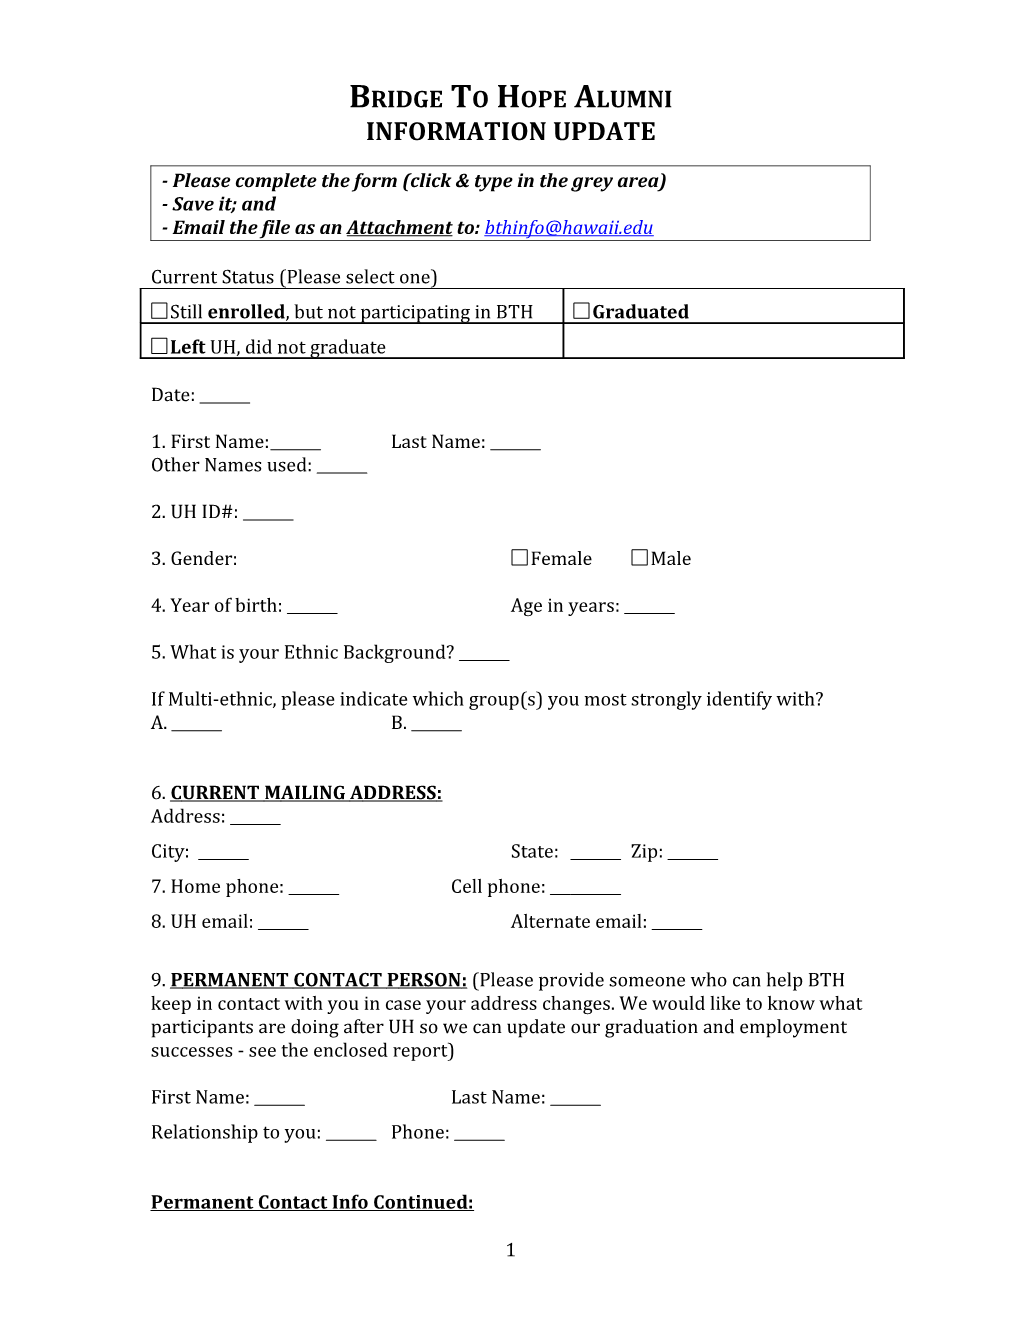 Please Complete the Form (Click & Type in the Grey Area)